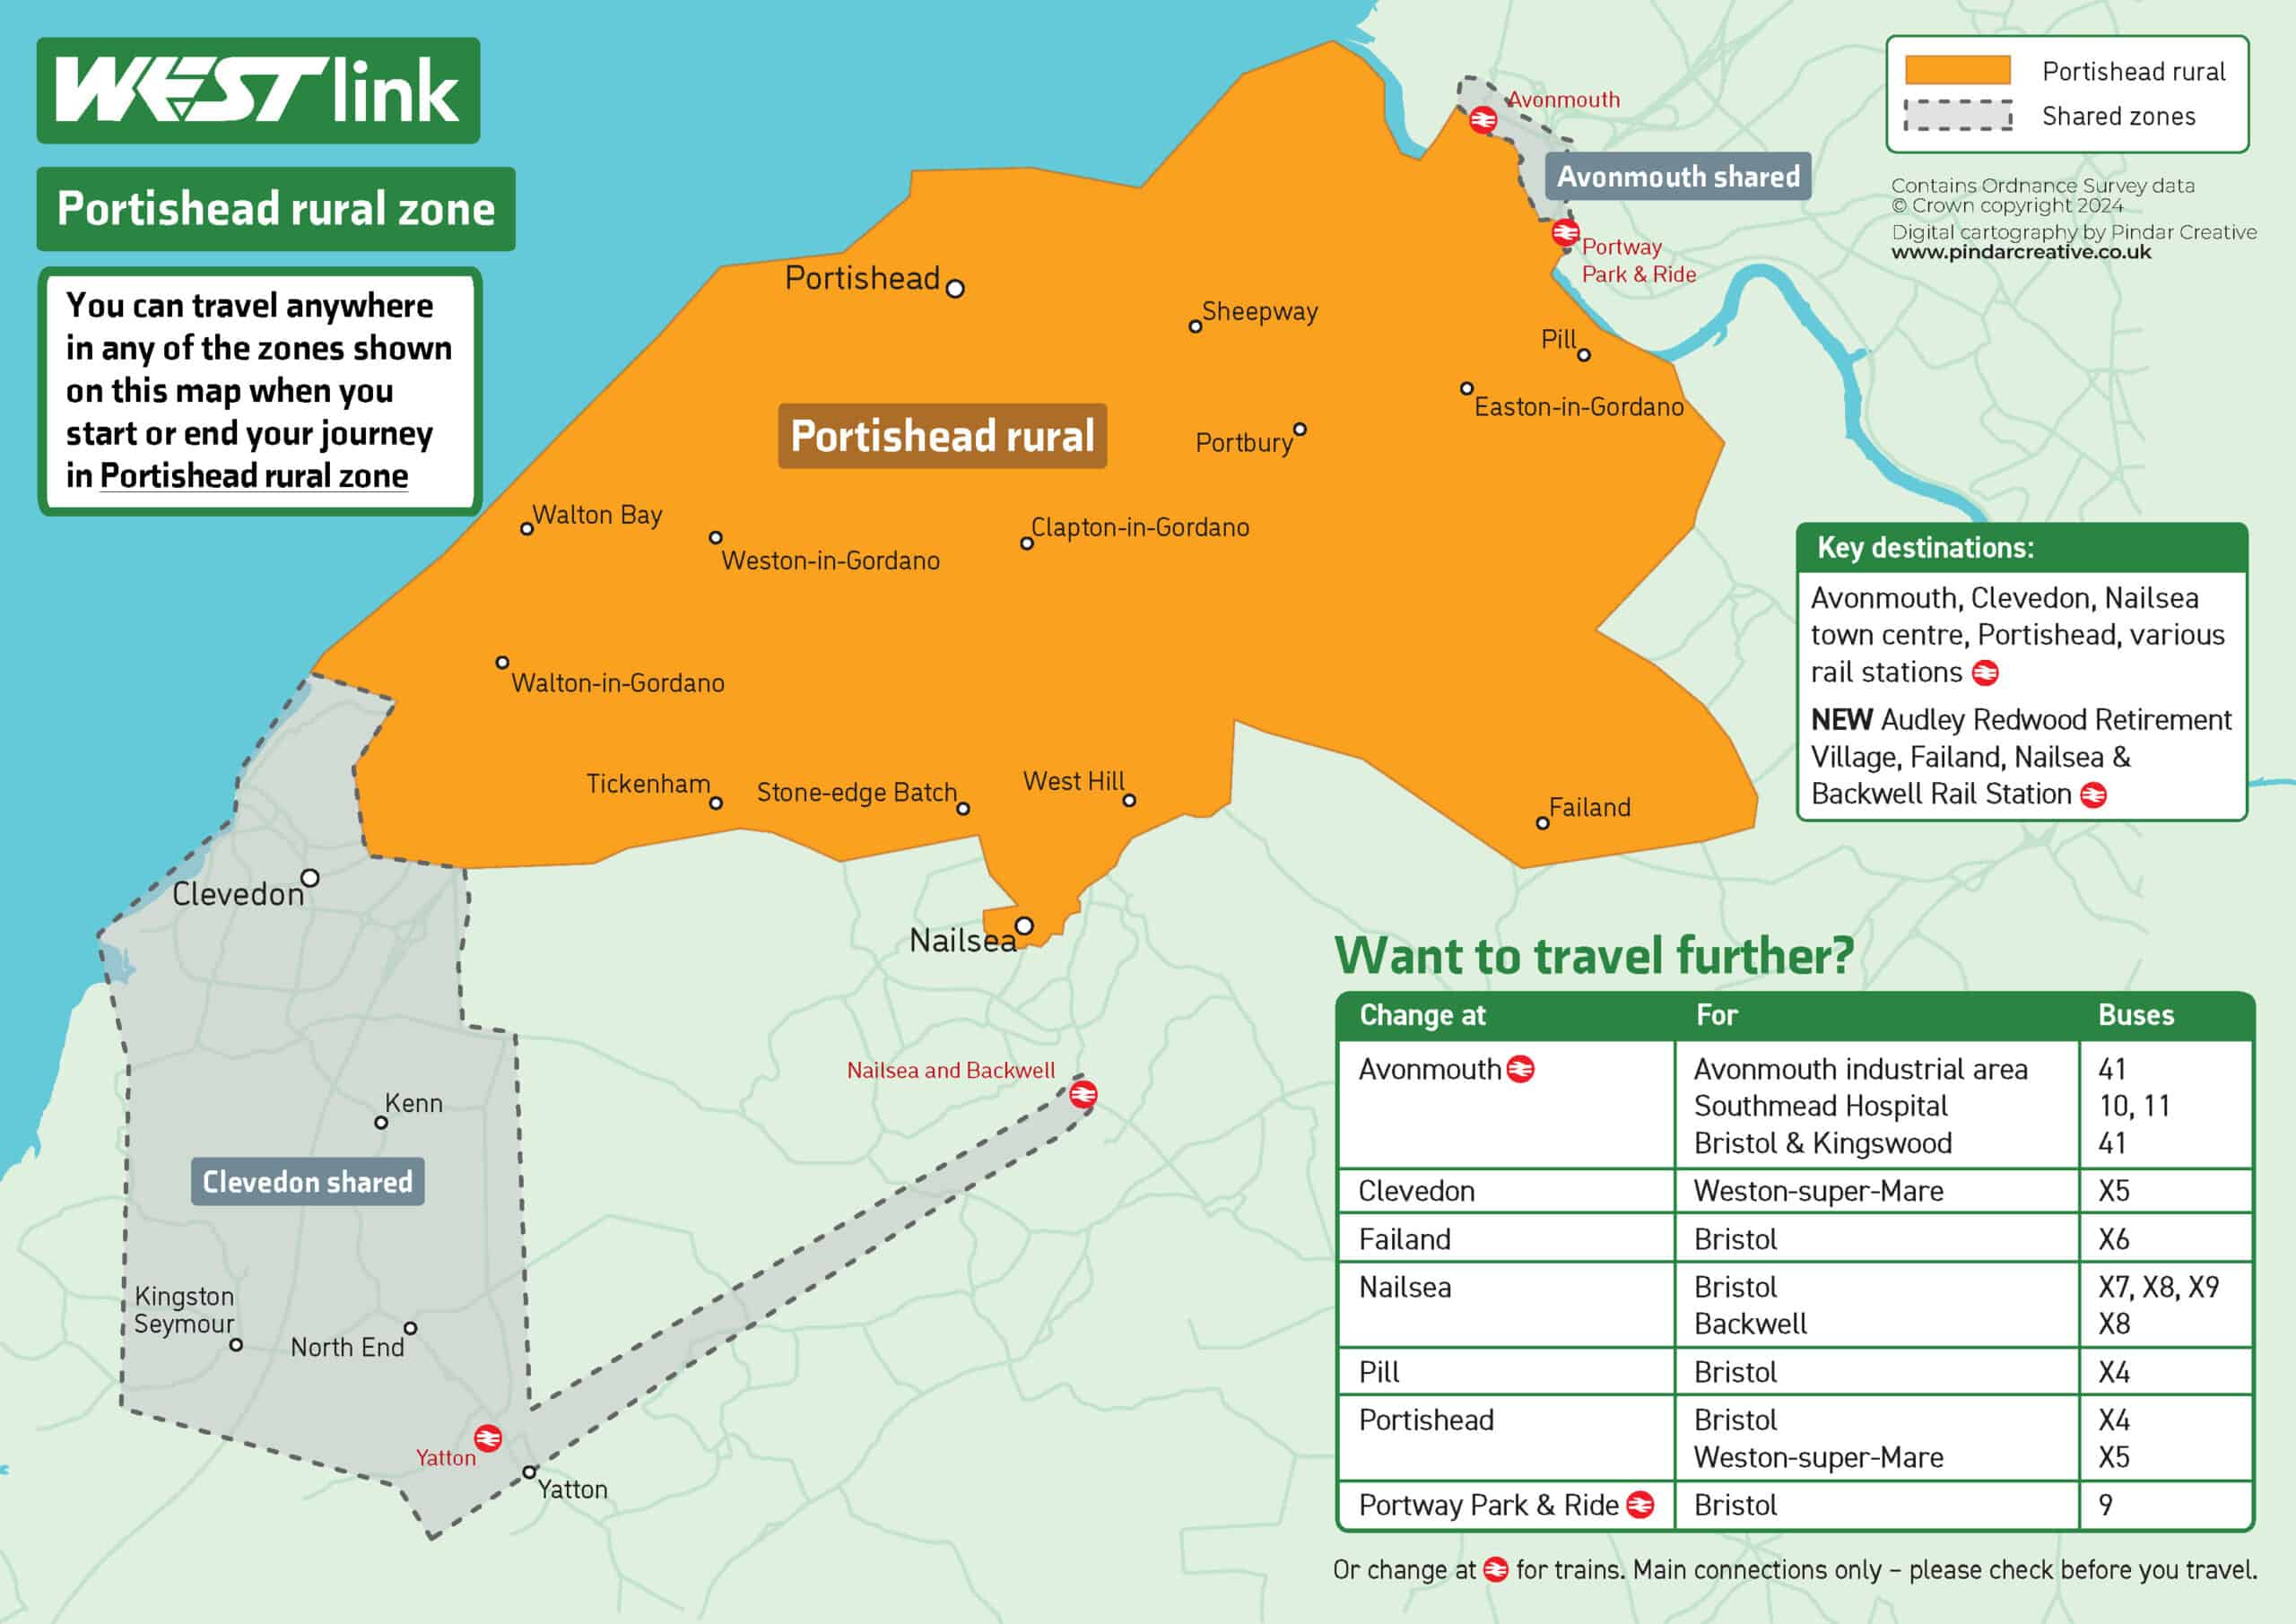 Portishead rural zone map showing the boundaries and where you can travel. This information is also provided in an accessible version below.